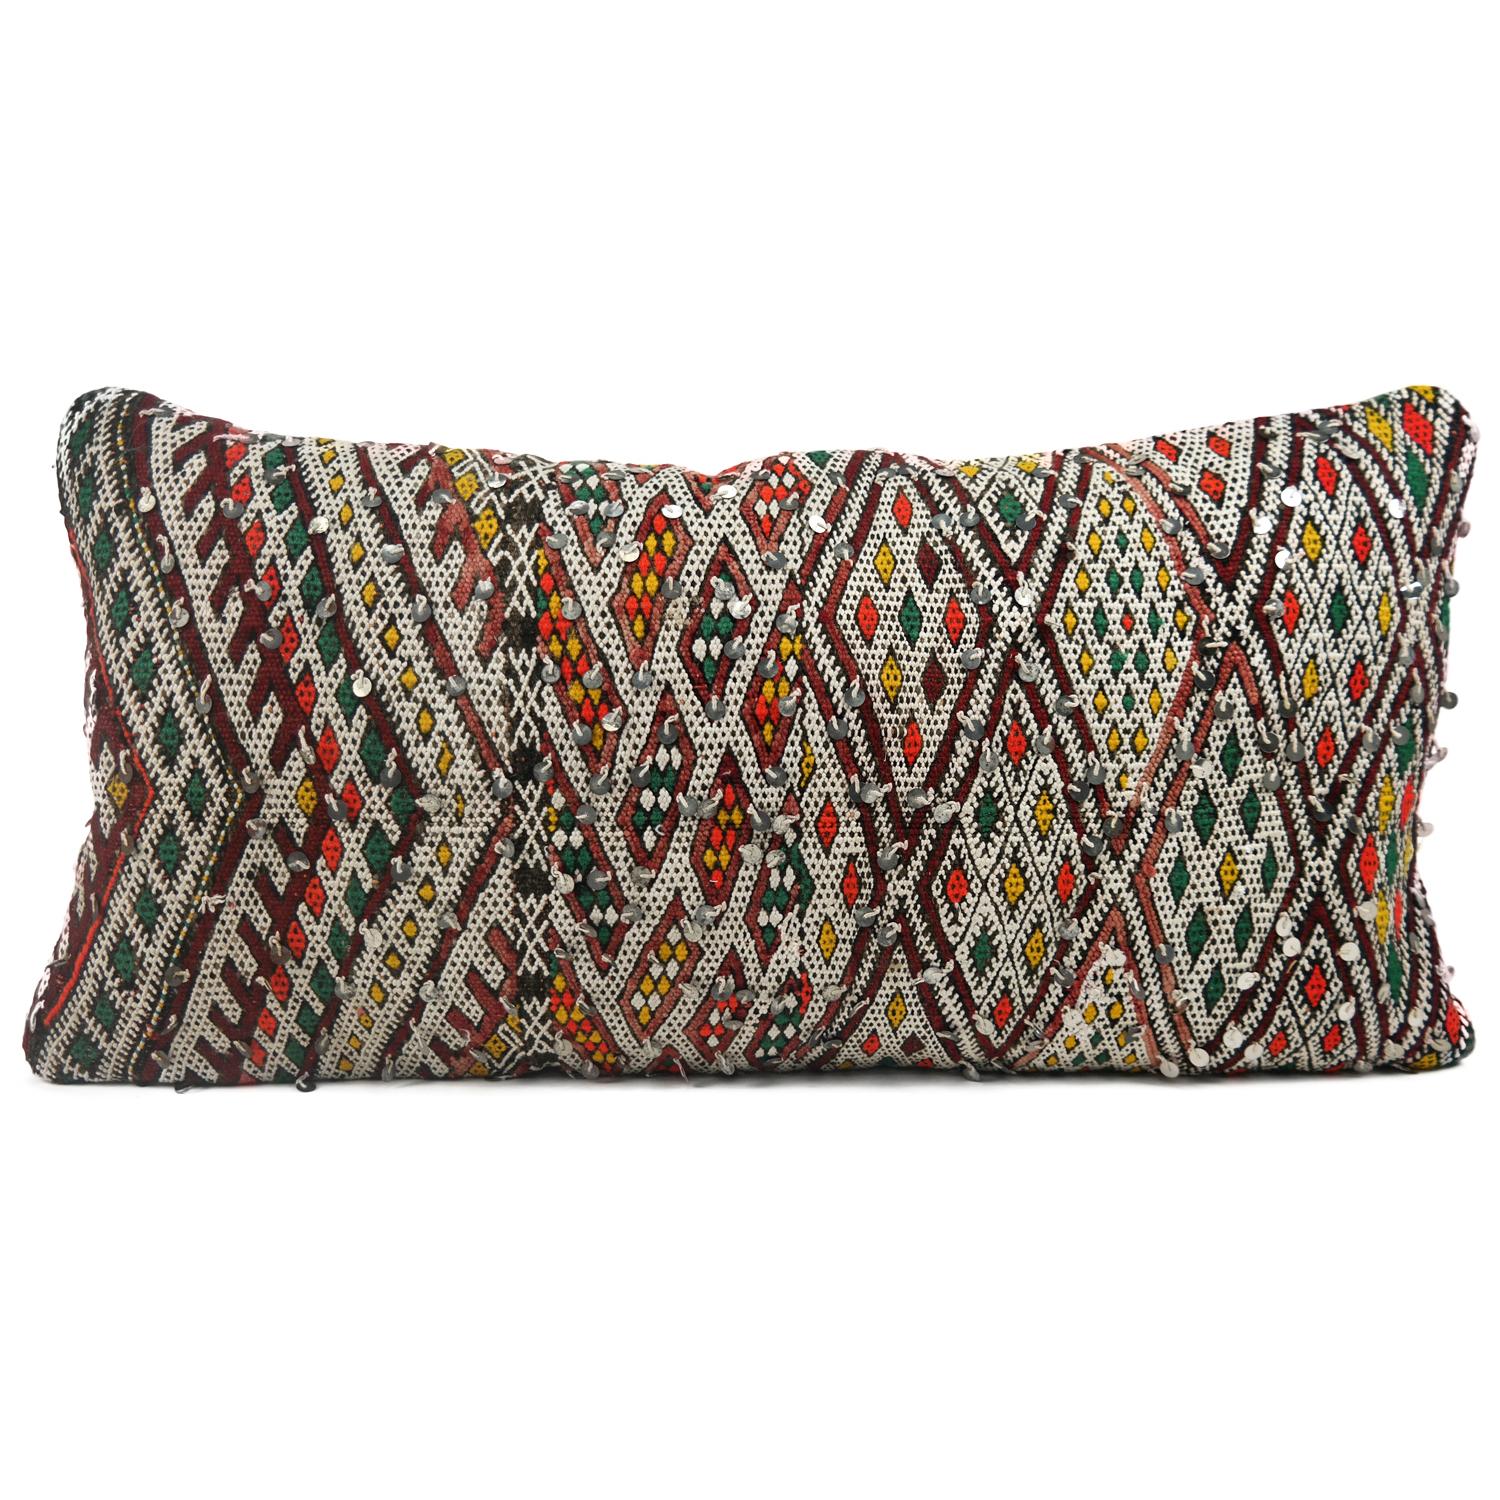 A stunning XL bohemian Moroccan kilim cushion custom made in Morocco. Cut from a circa 40 years old hand loomed kilim rug, from the Middle Atlas Mountains. We have searched and selected the rug ourselves. The pillow has beautiful colors like red,